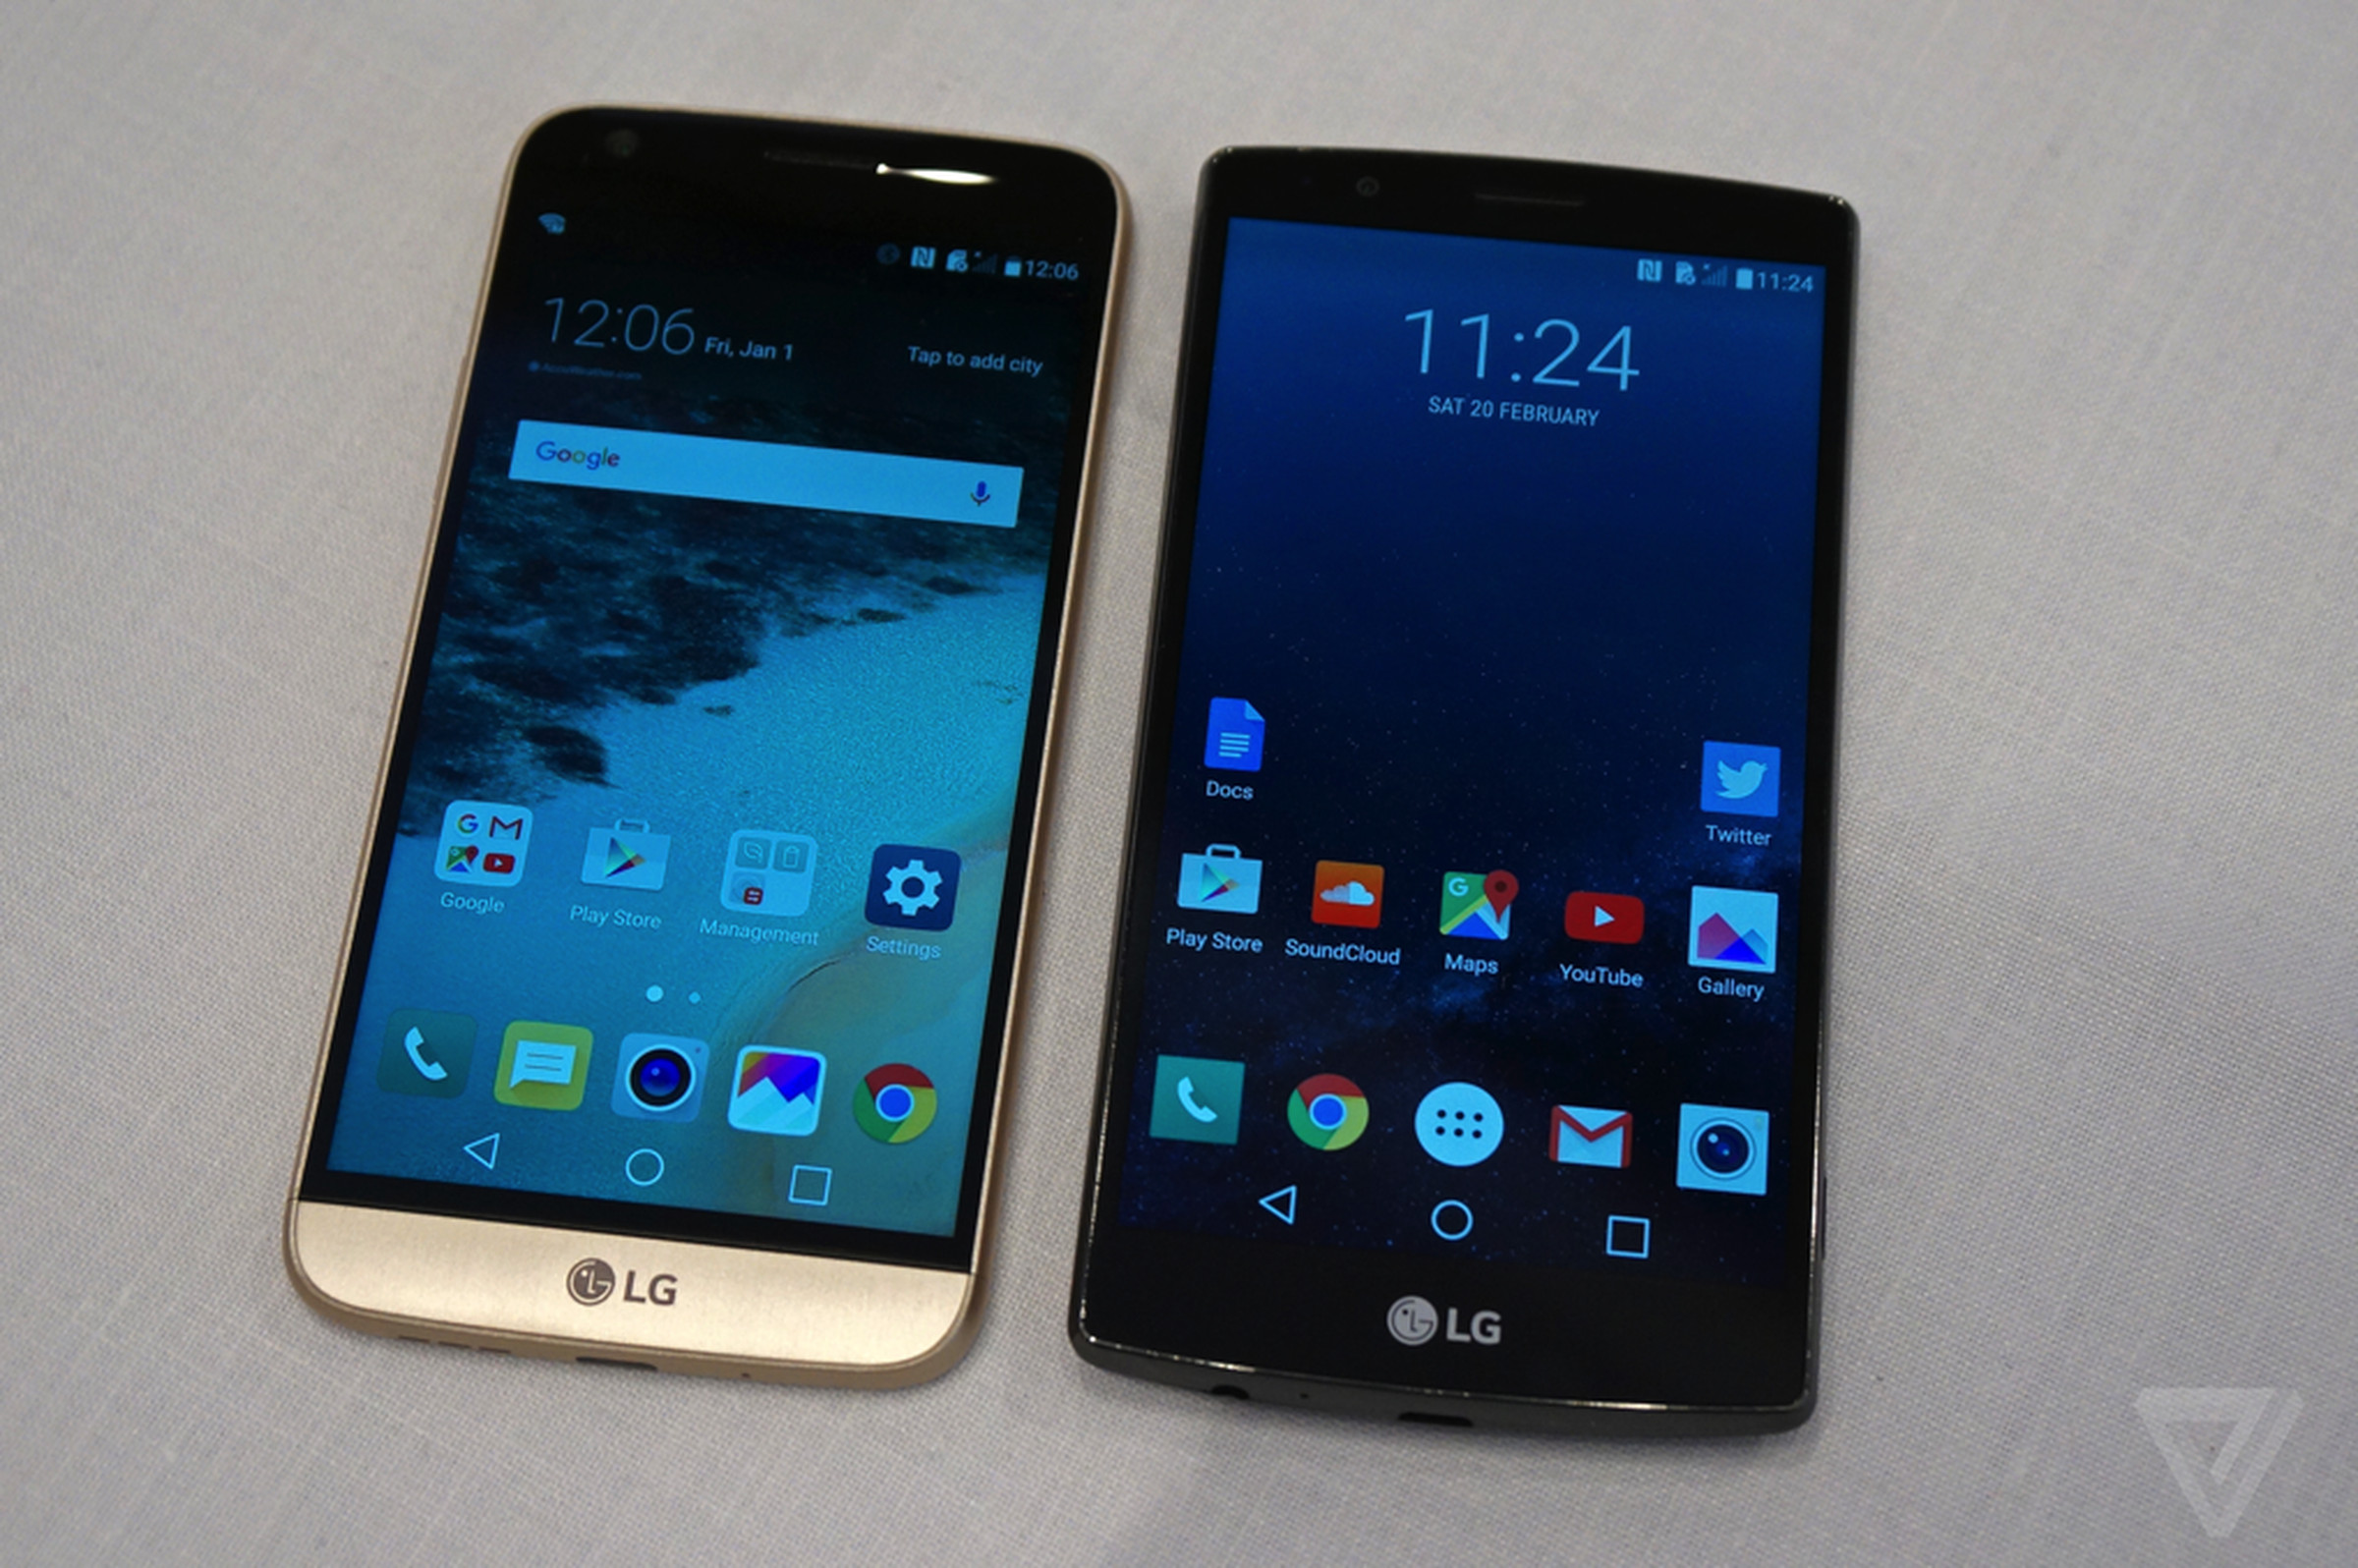 LG G5 and Friends hands-on photos